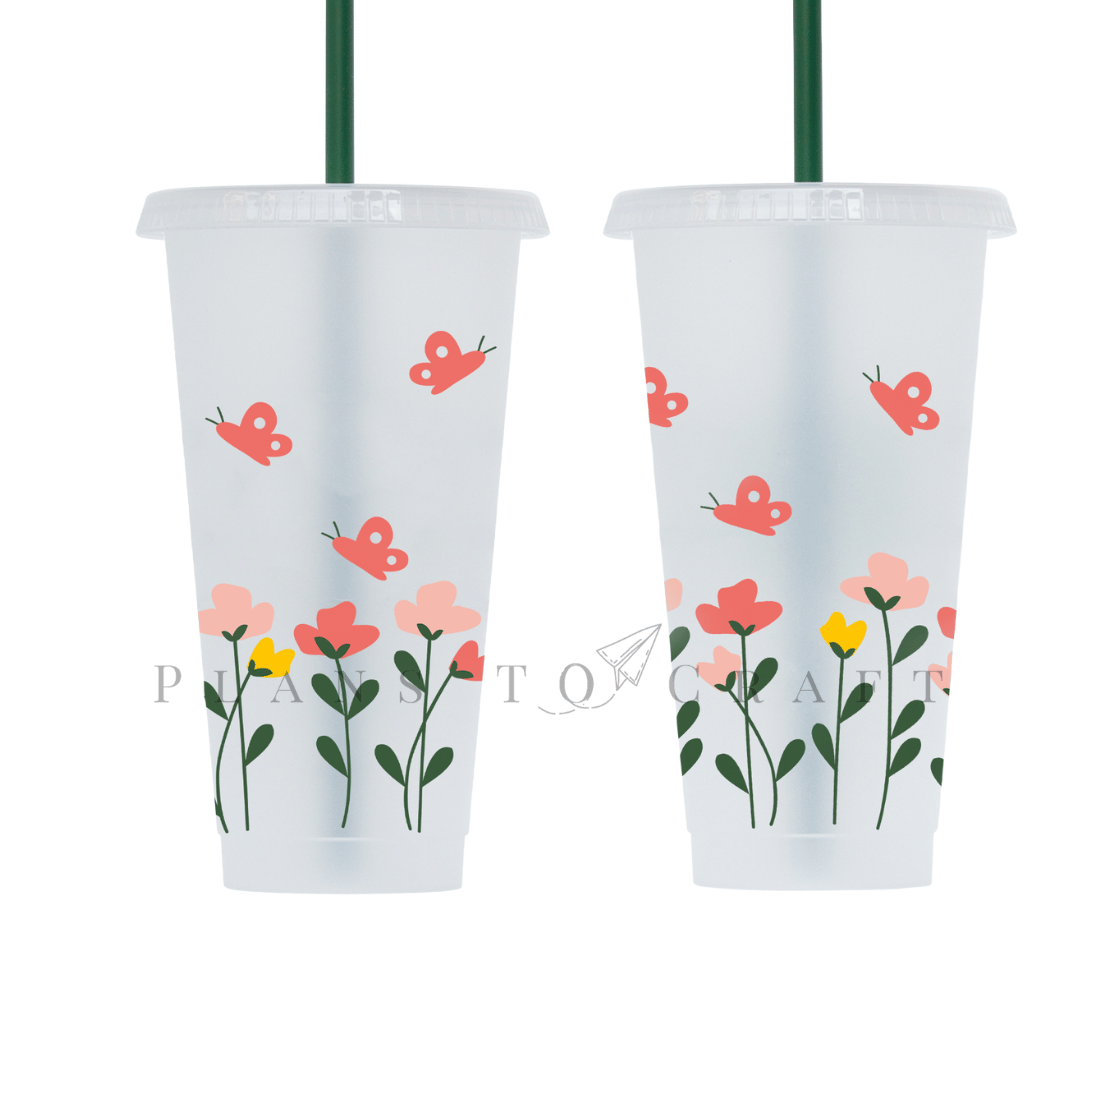 Two plastic cups with flowers and butterflies painted on them.